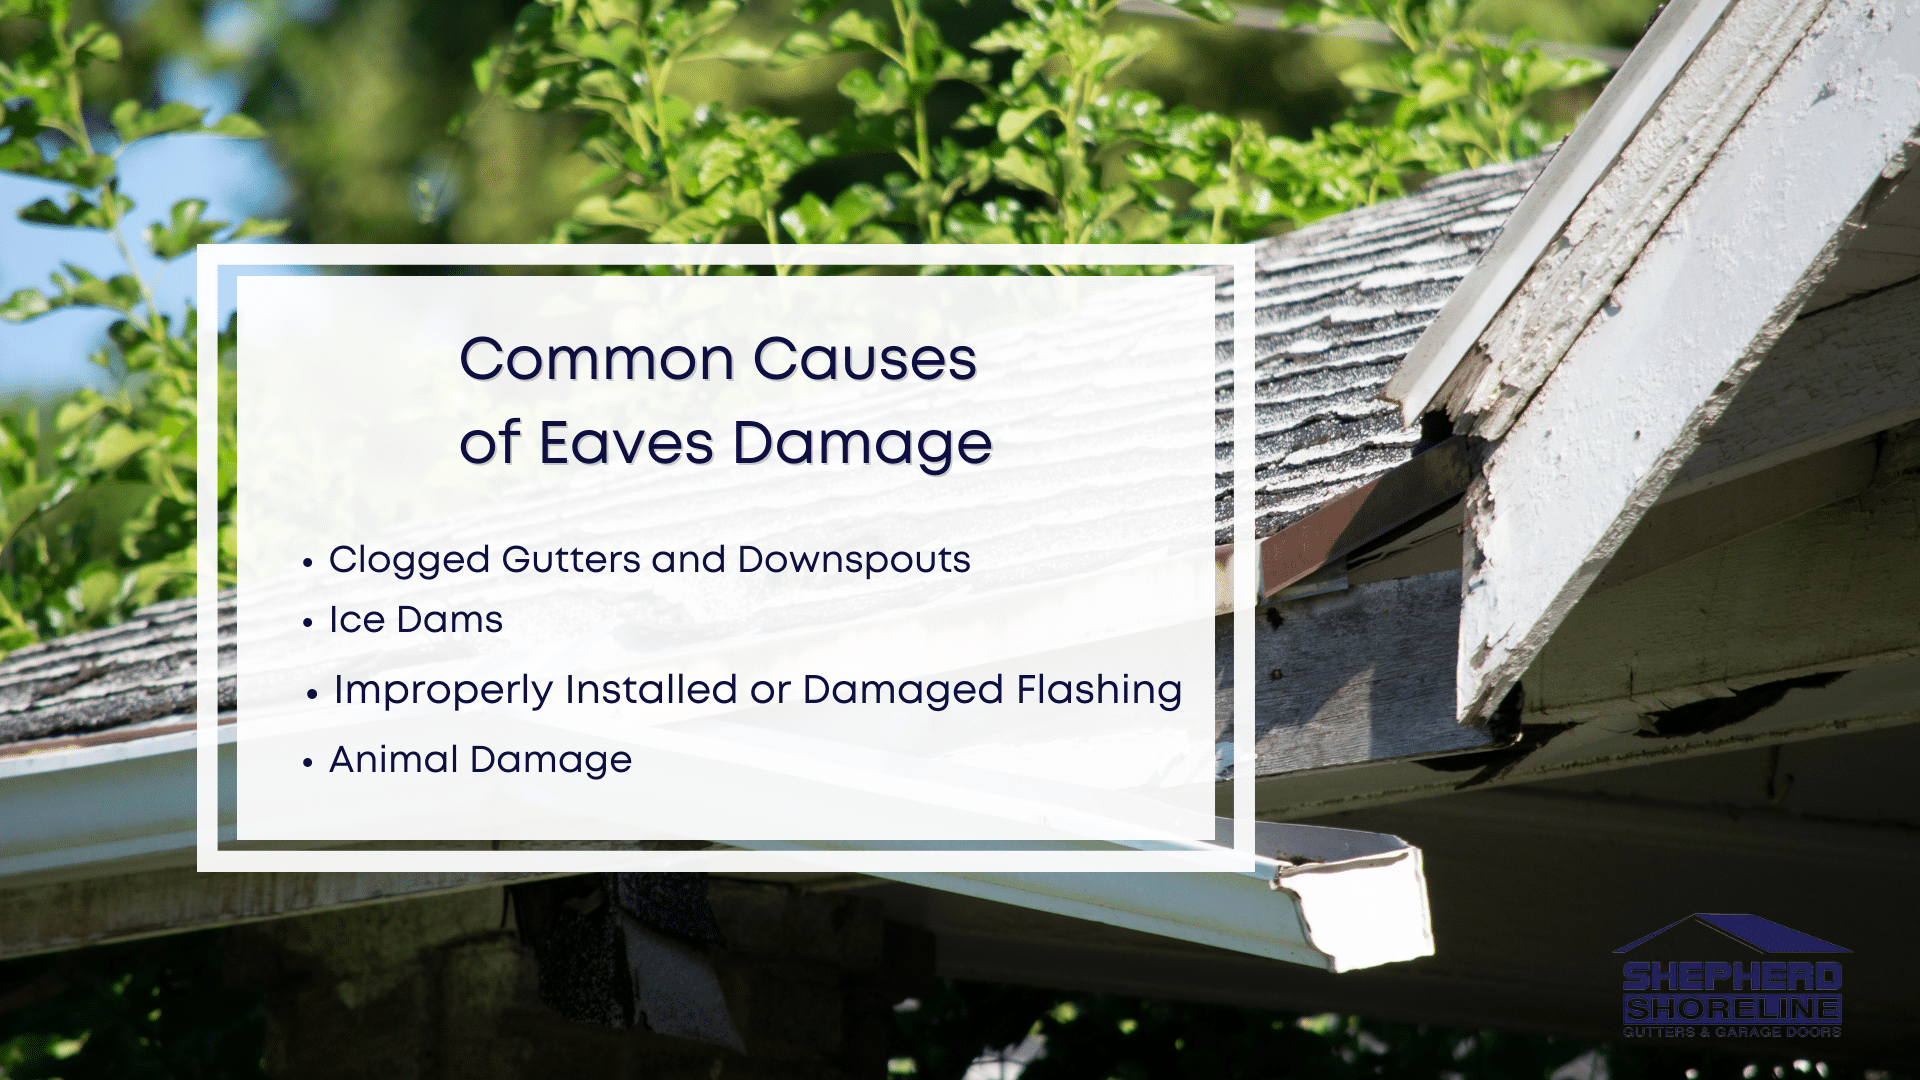 Infographic image of common causes of eaves damage